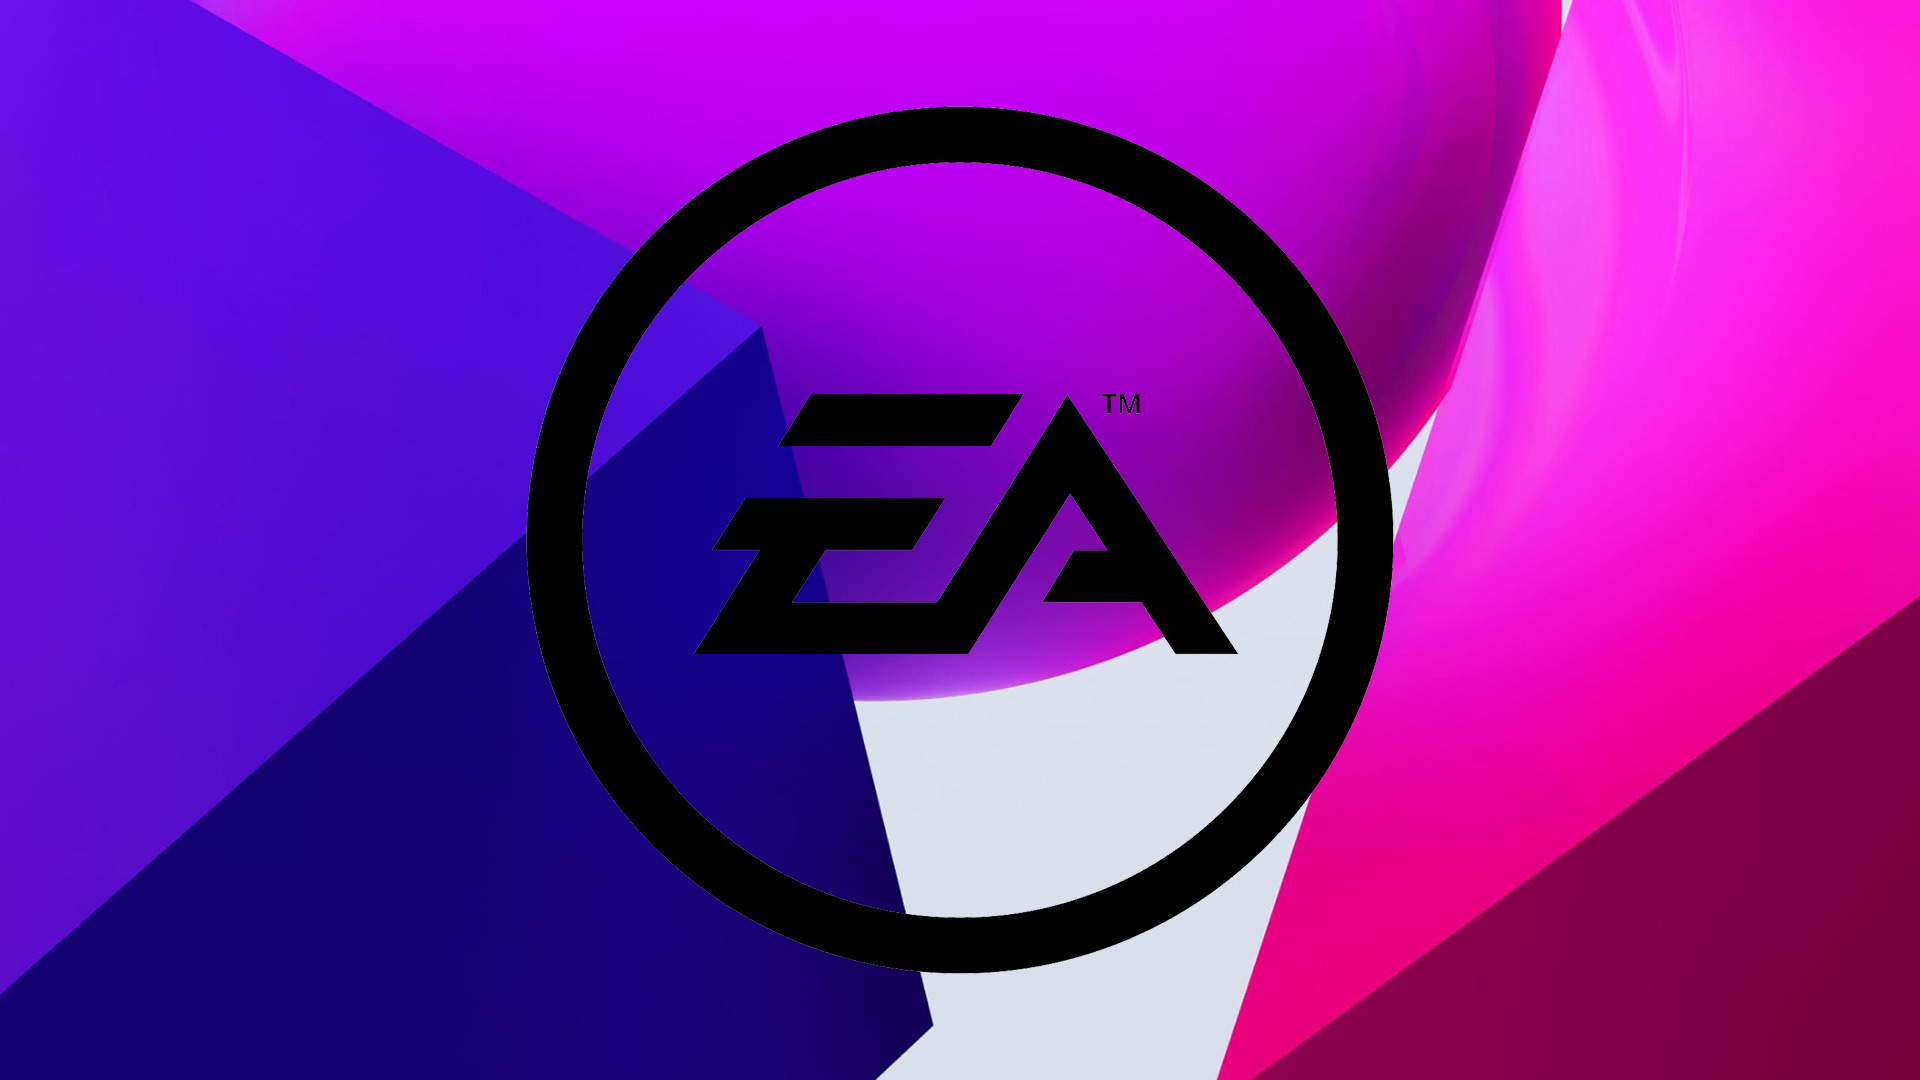 Electronic Arts (EA) is reorganizing the company into two divisions